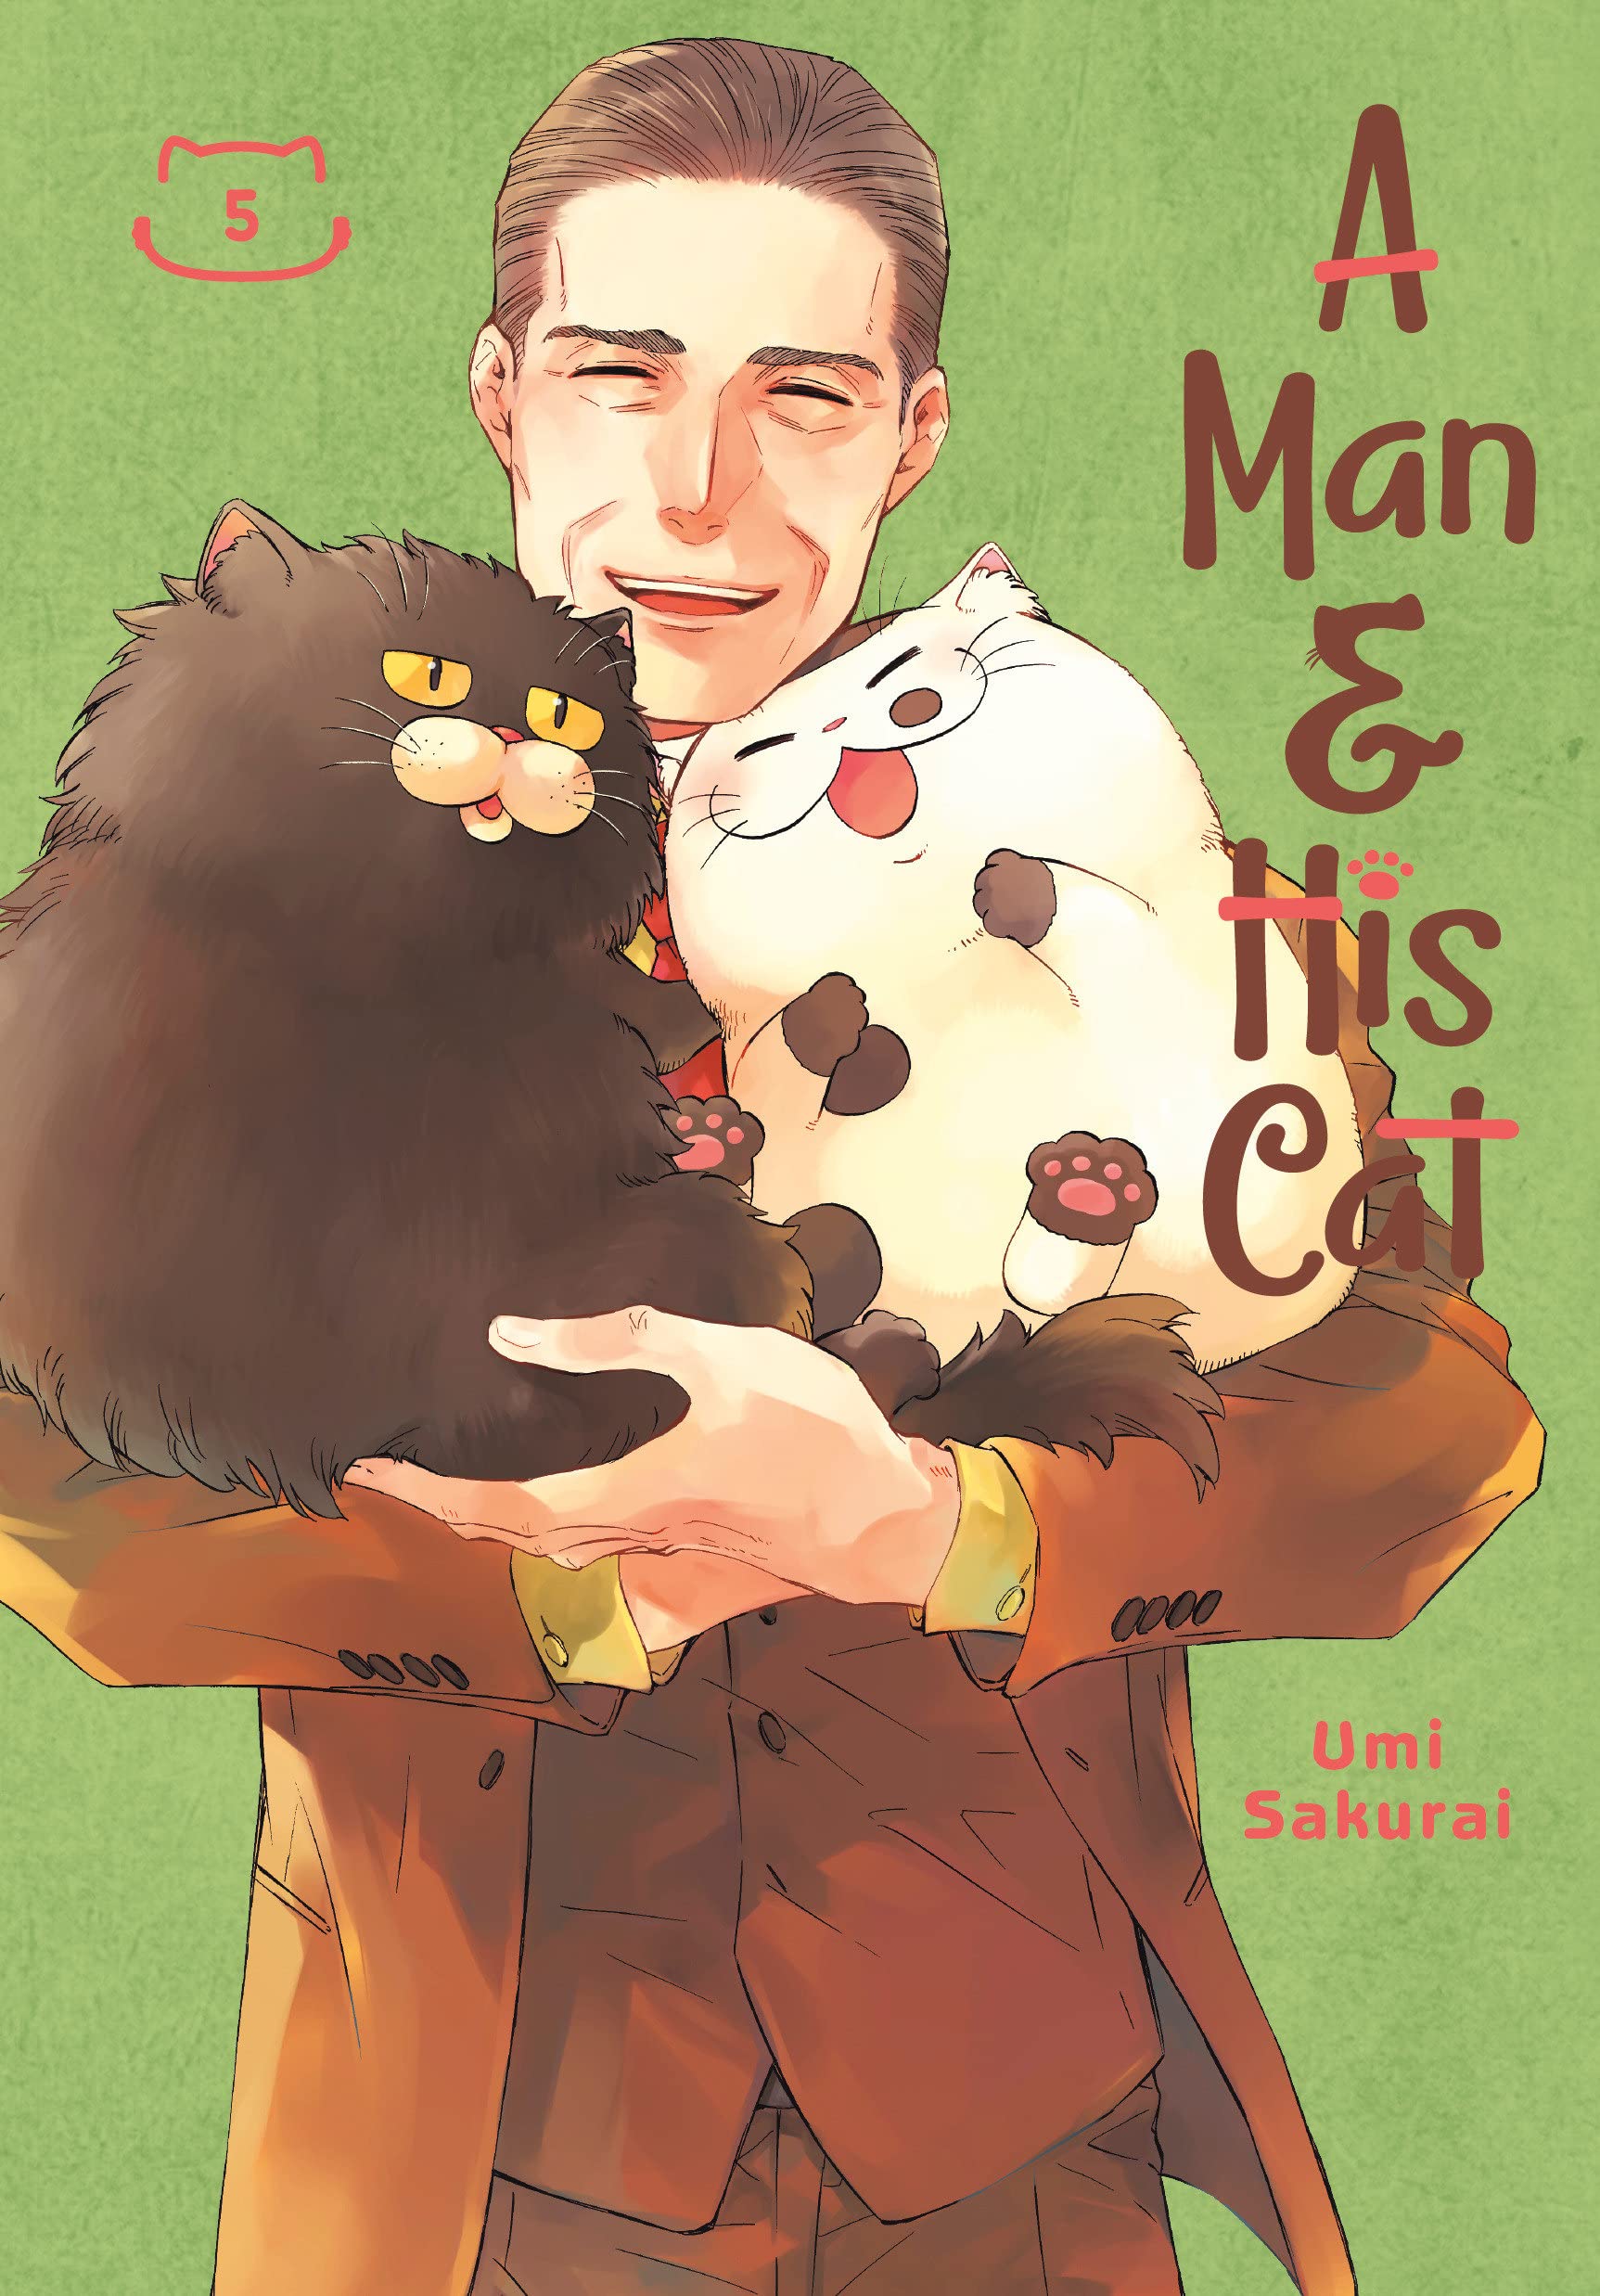 A Man And His Cat - Volume 5